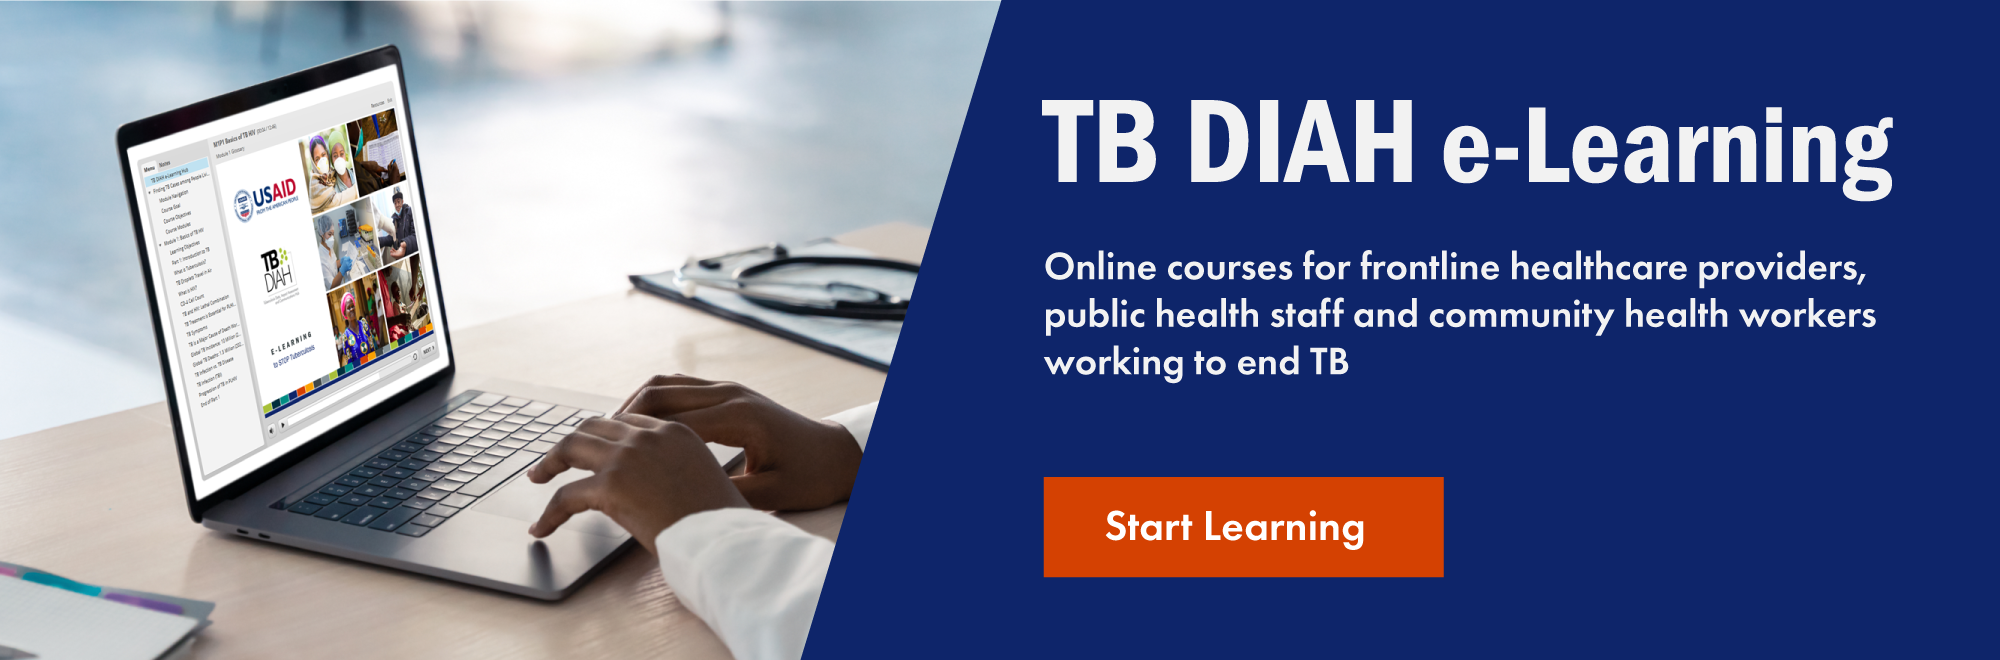 TB DIAH e-Learning Online courses for frontline healthcare providers, public health staff and community health workers working to end TB